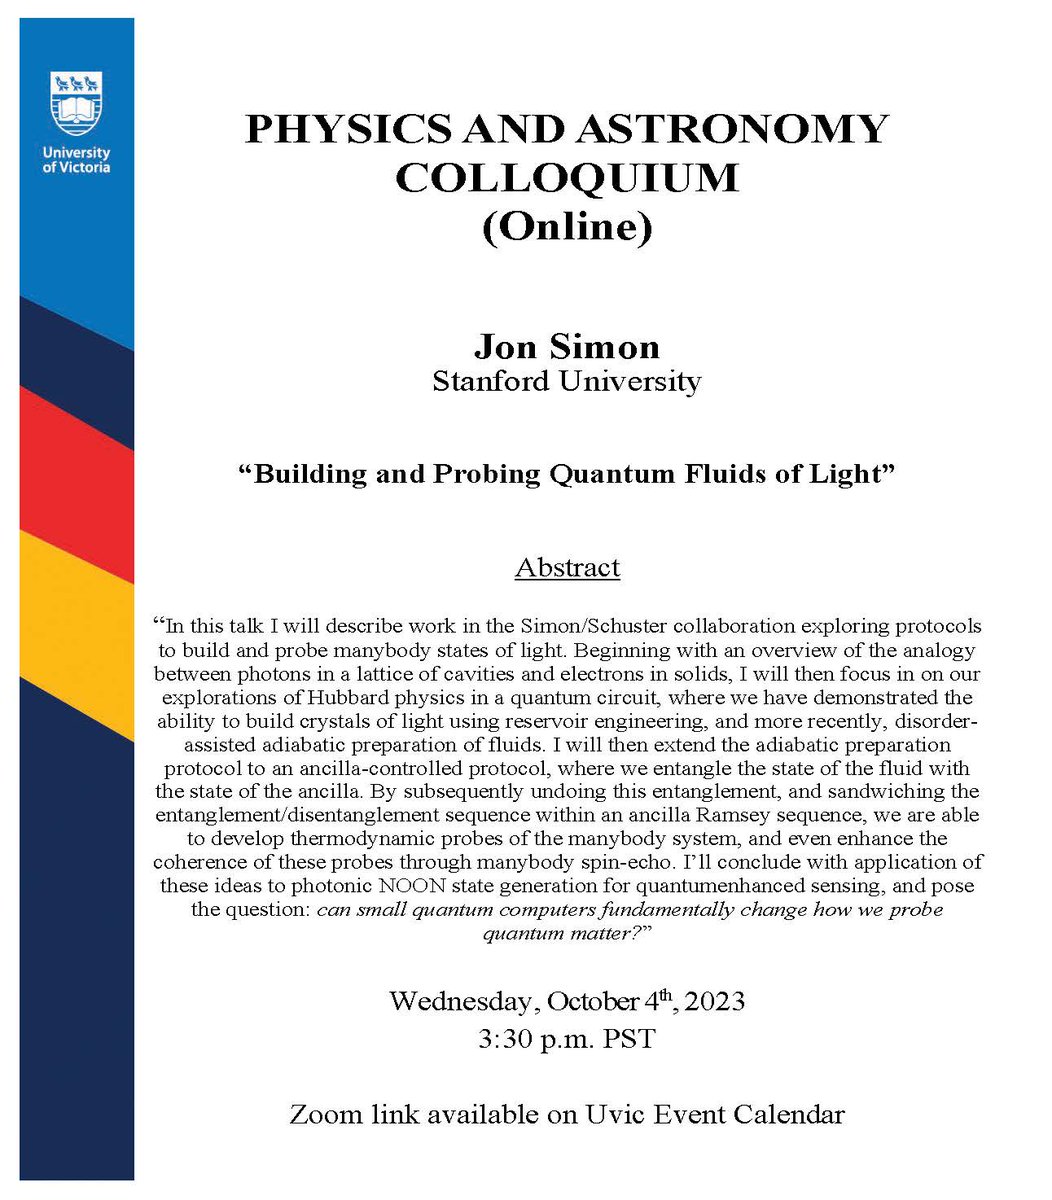 COLLOQUIUM (Online): Dr. Jonathan Simon, Stanford University, will give an online colloquium on Wednesday, October 4th at 3:30 PST. For more information: events.uvic.ca/physics/event/…